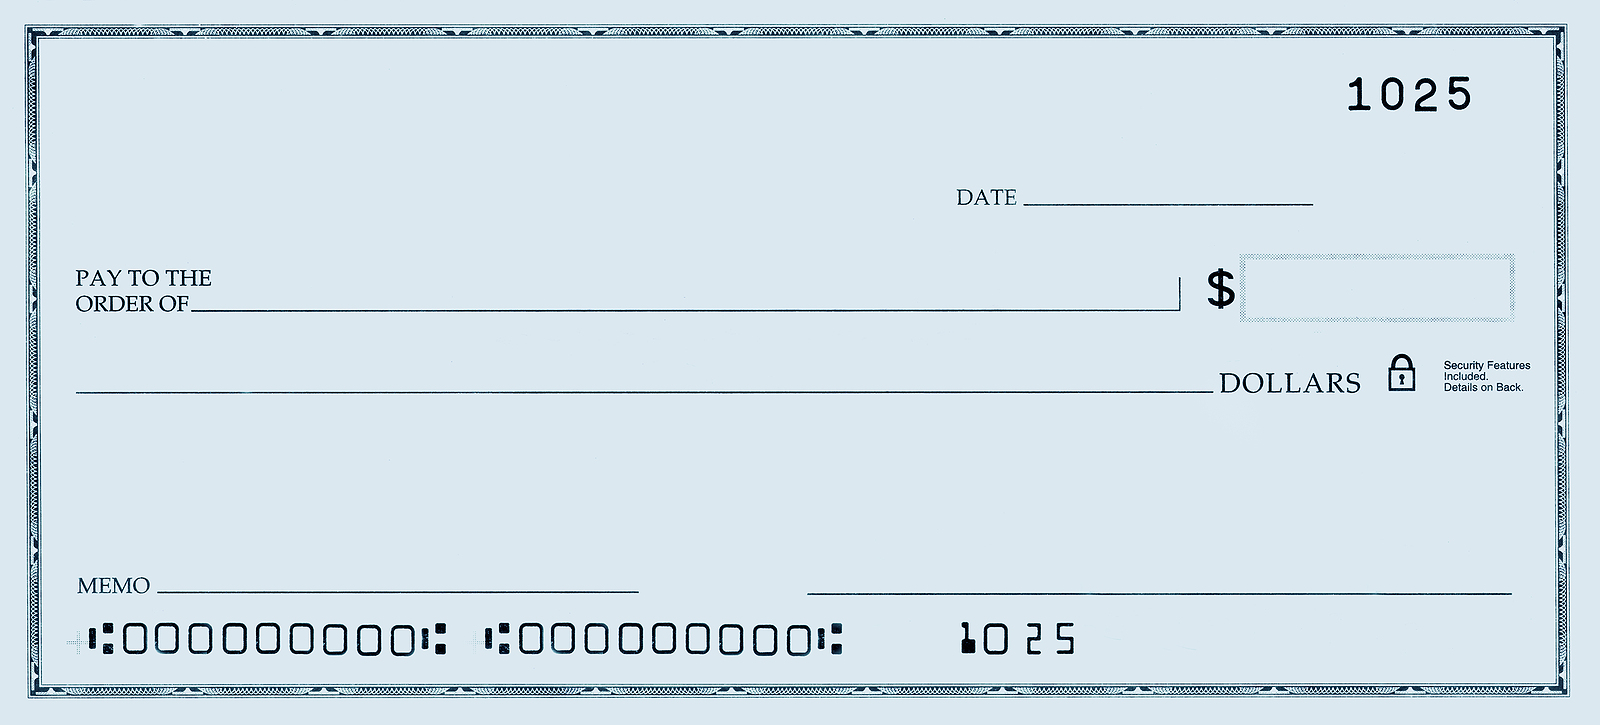 How to Find Your Account Number on a Check